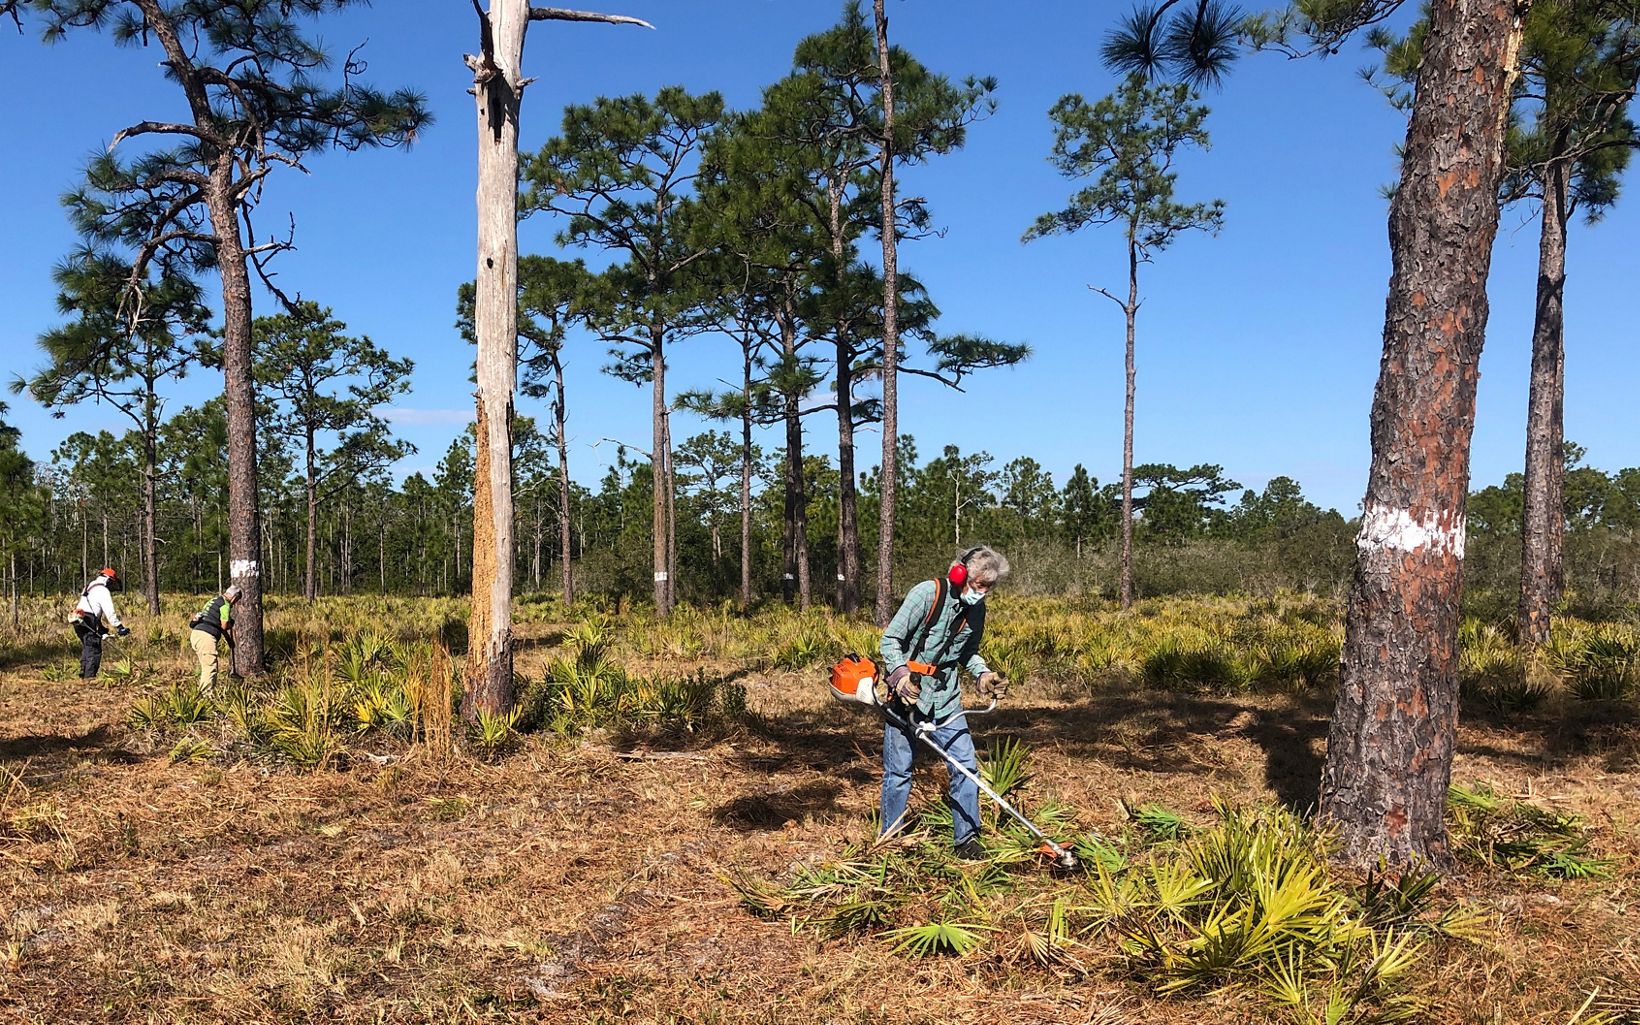 Habitat Restoration Volunteers participate in the Red-Cockaded Woodpecker workdays, restoring the nesting habitat to support the translocation program at The Disney Wilderness Preserve.  © Chelsea MacKenzie/TNC